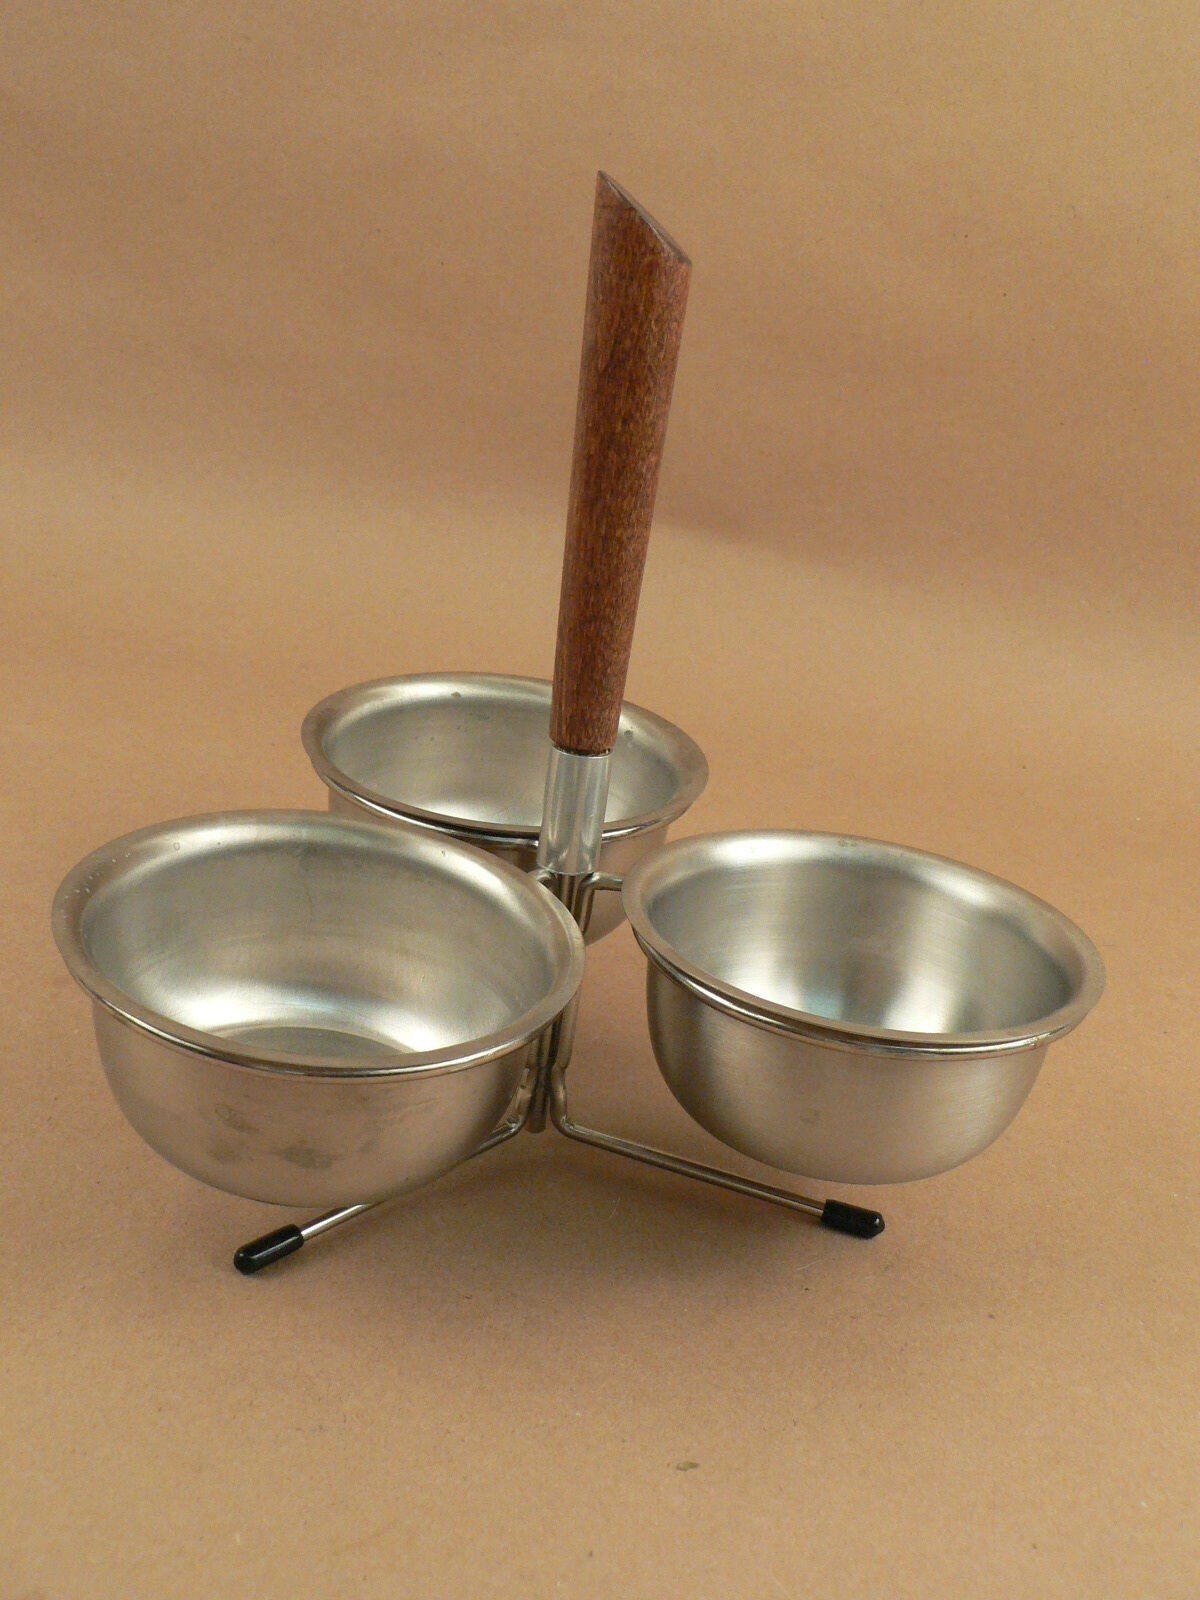 A Swedish modern retro condiment servers, 3 cups each, wood handle stand